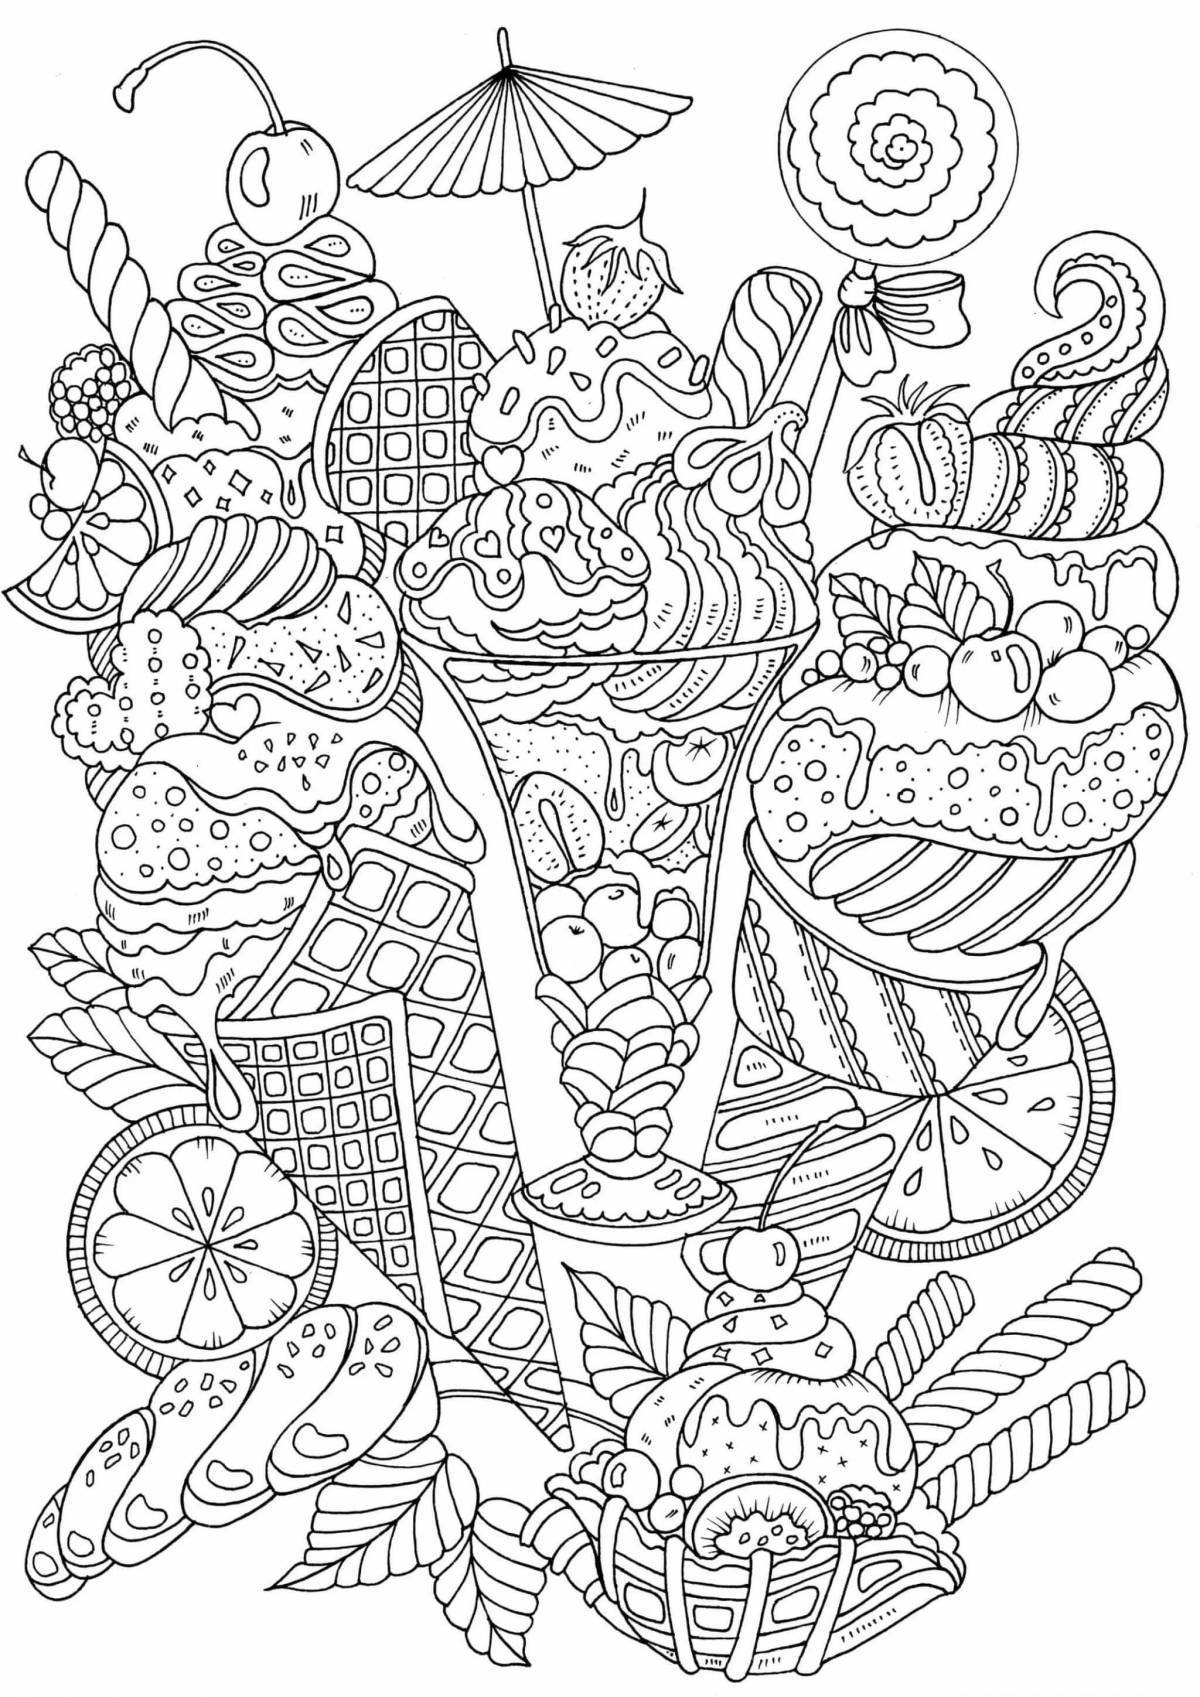 Exciting anti-stress coloring book